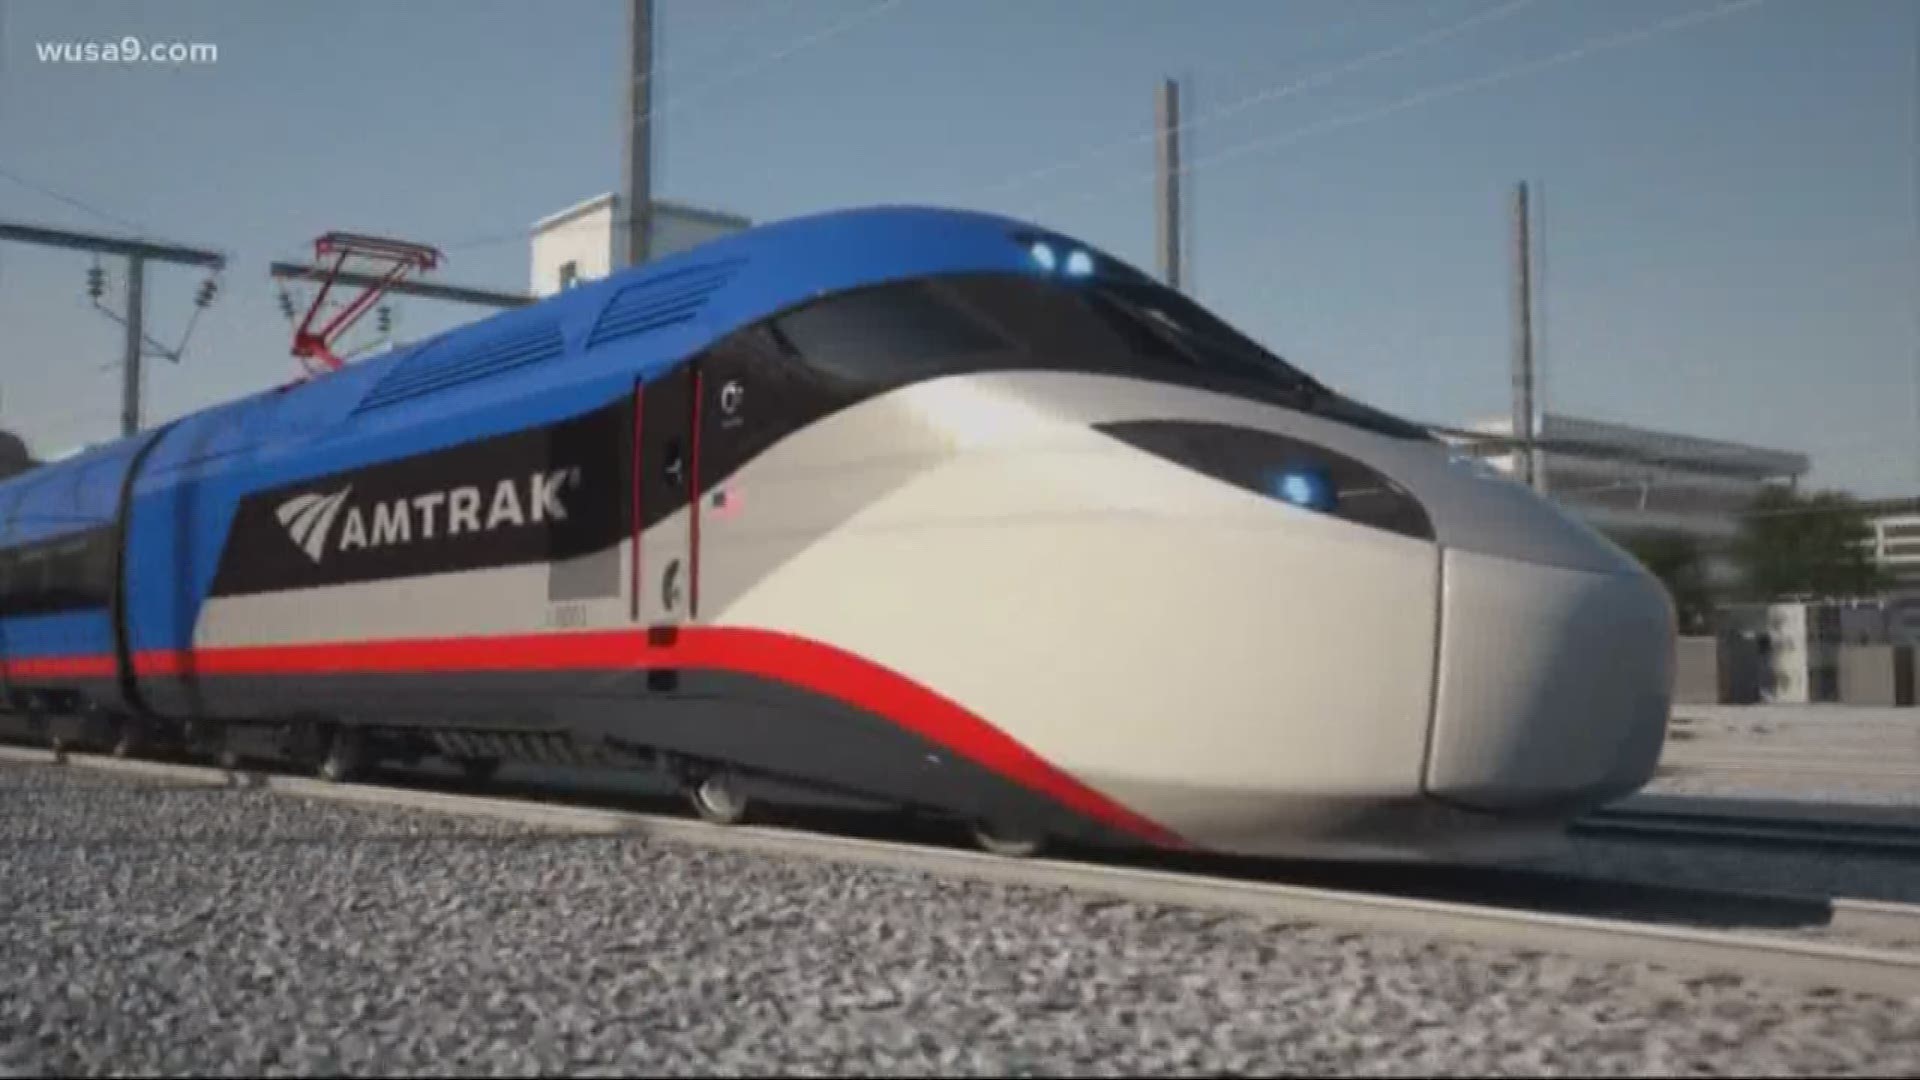 But until D.C. has a Maglev train, Amtrak is the best bet. And data sows that 1 in 4 Amtrak trains still arrives late.